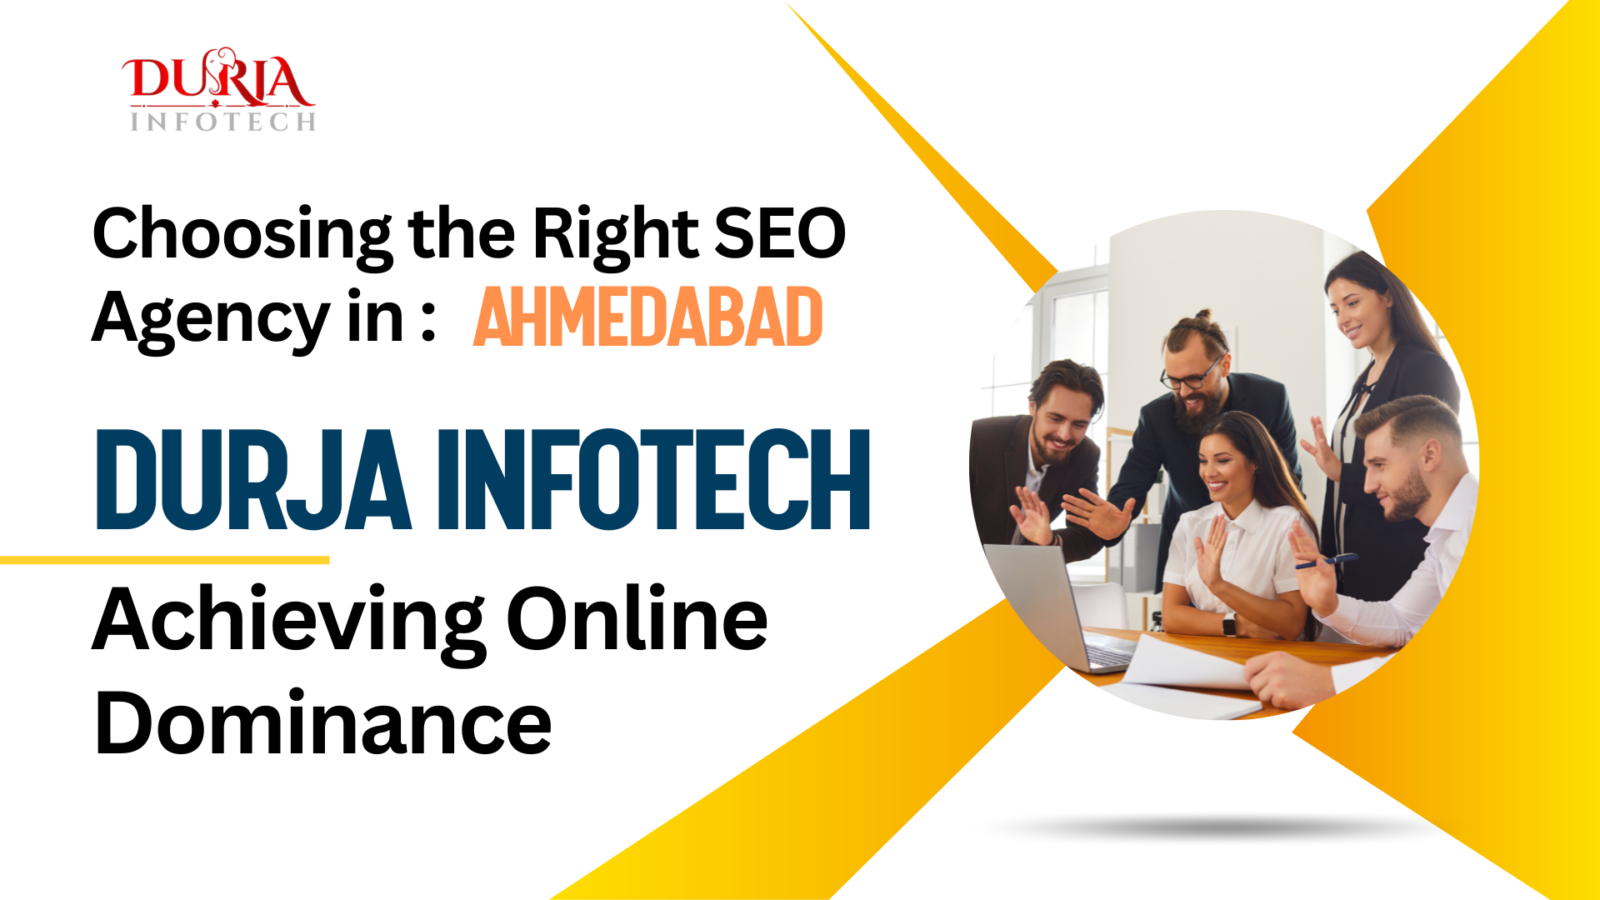 Choosing the Right SEO Agency in Ahmedabad: Durja Infotech Achieving Online Dominance